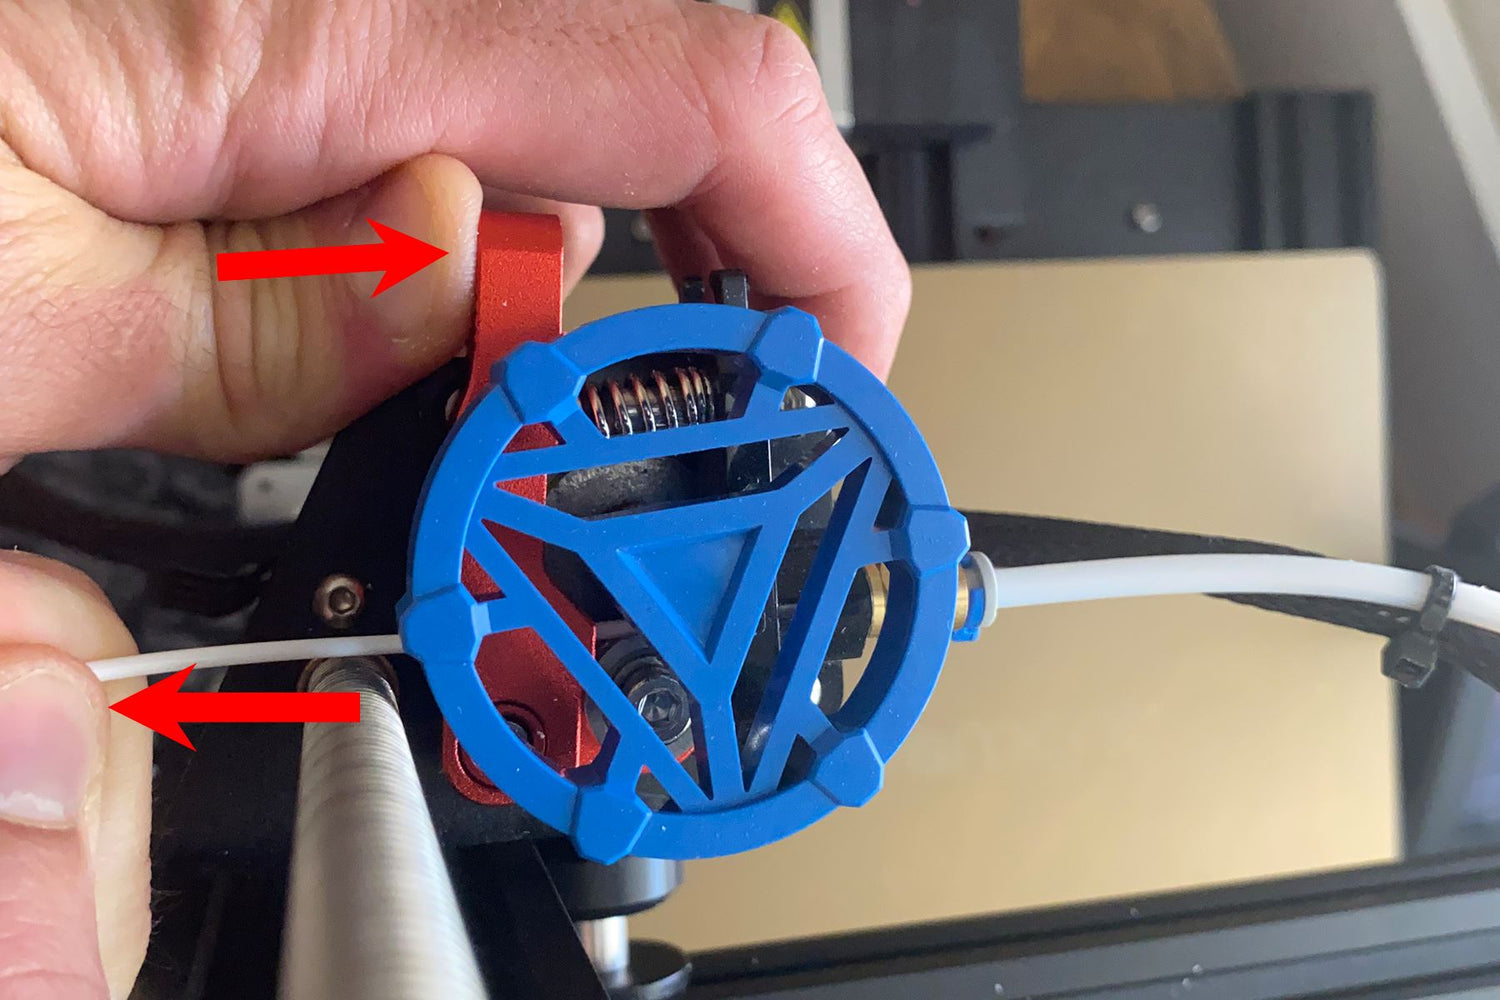 Change Filament on the Creality Ender 3 3D Printer : 8 Steps - Instructables